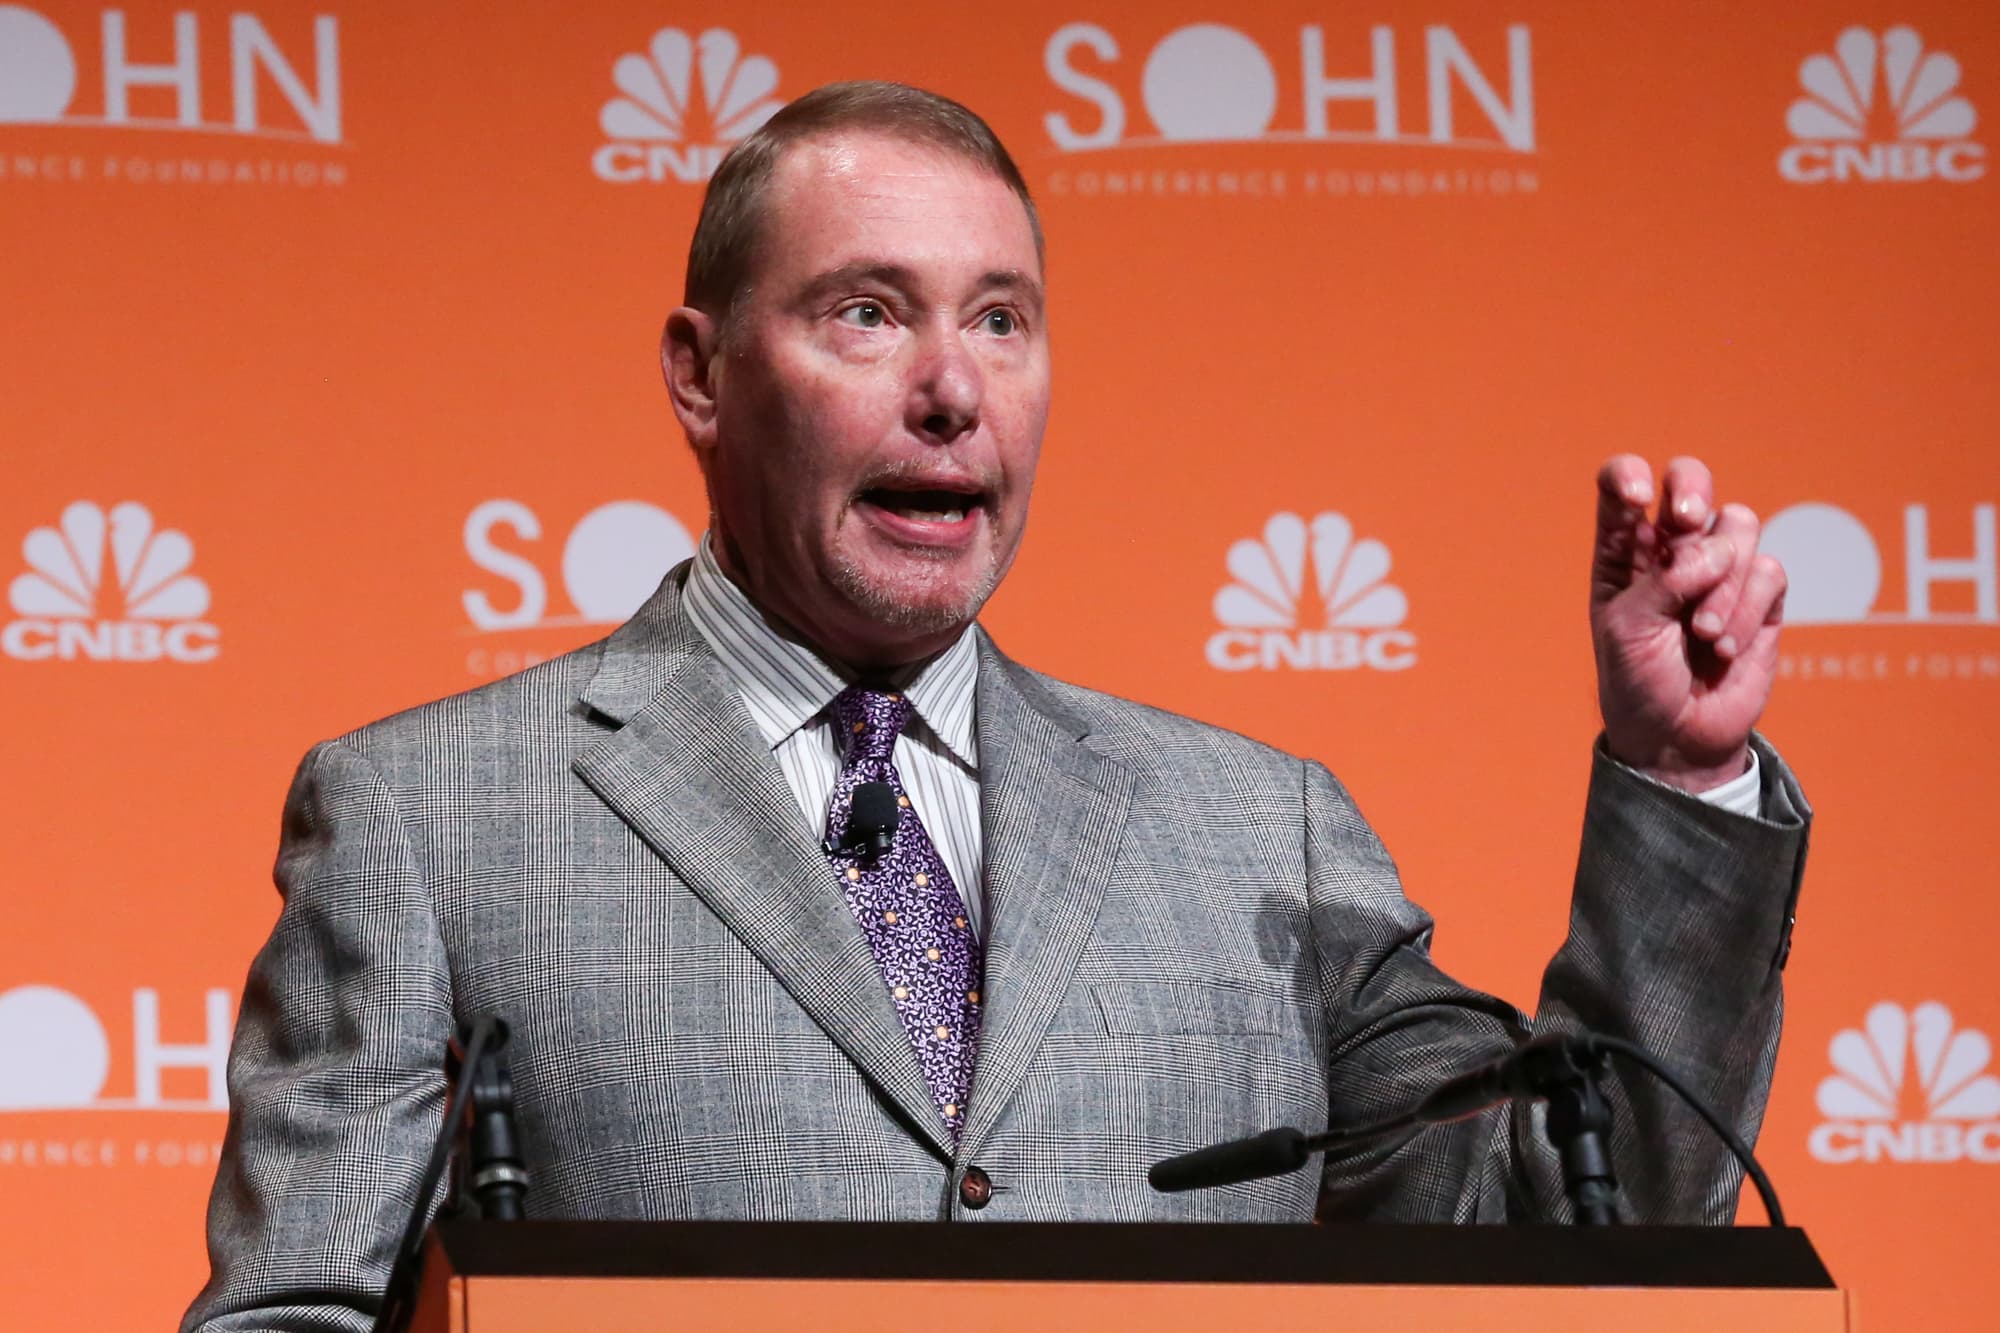 Bond king Gundlach says the Fed should no longer raise interest rates after the last hike